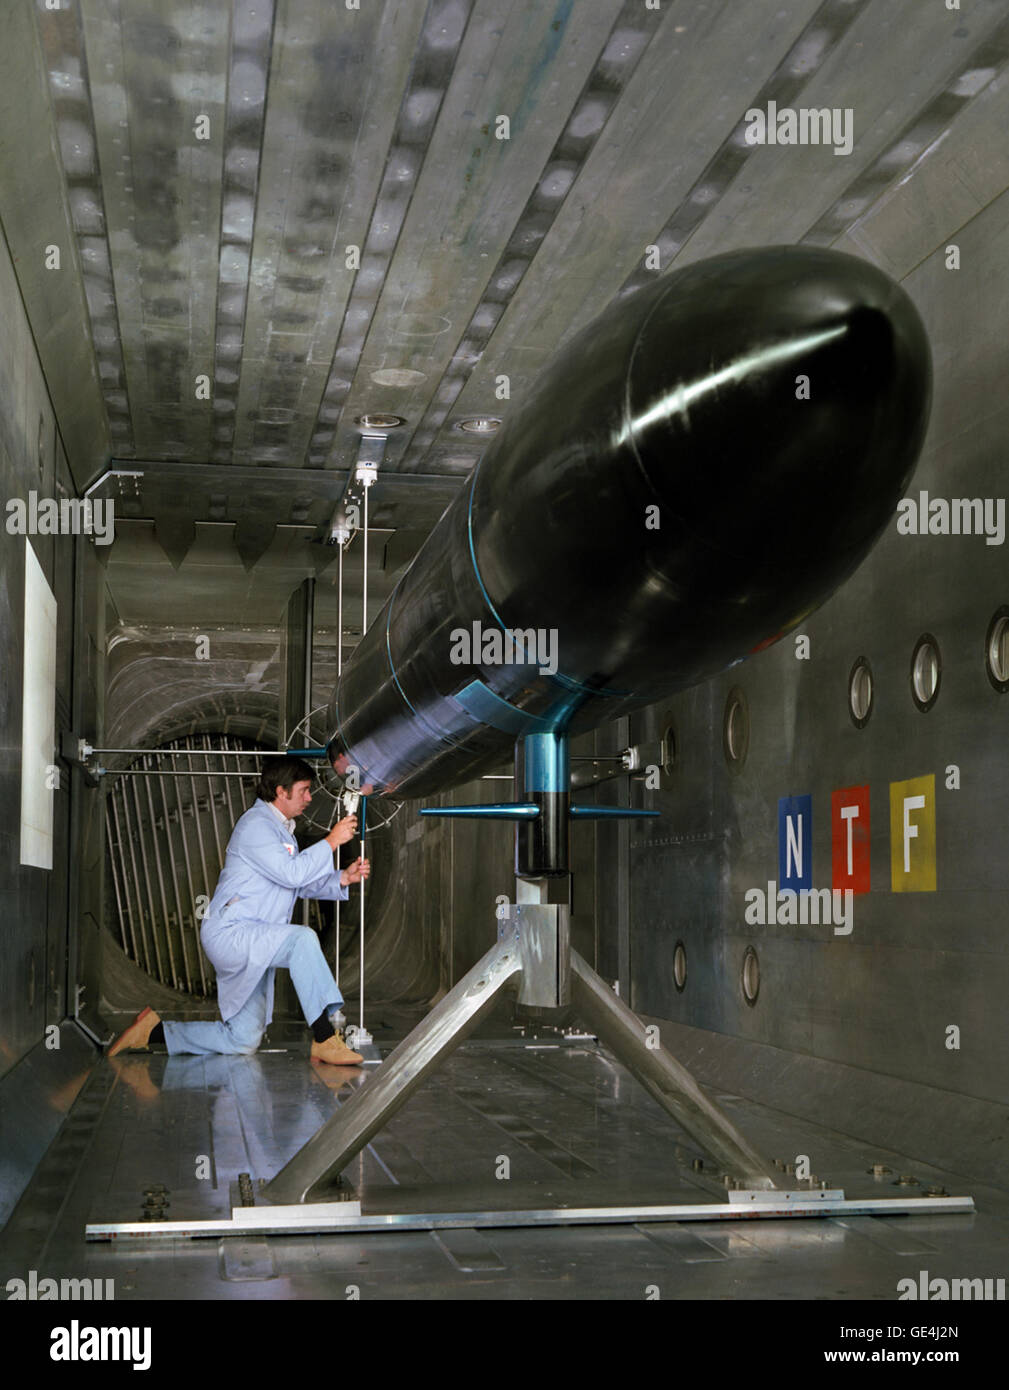 Navy submarine undergoing tests in the National Transonic Facility. Because air works in the same way as a liquid, it can be used to simulate the effects of water on a submarine hull. Stock Photo